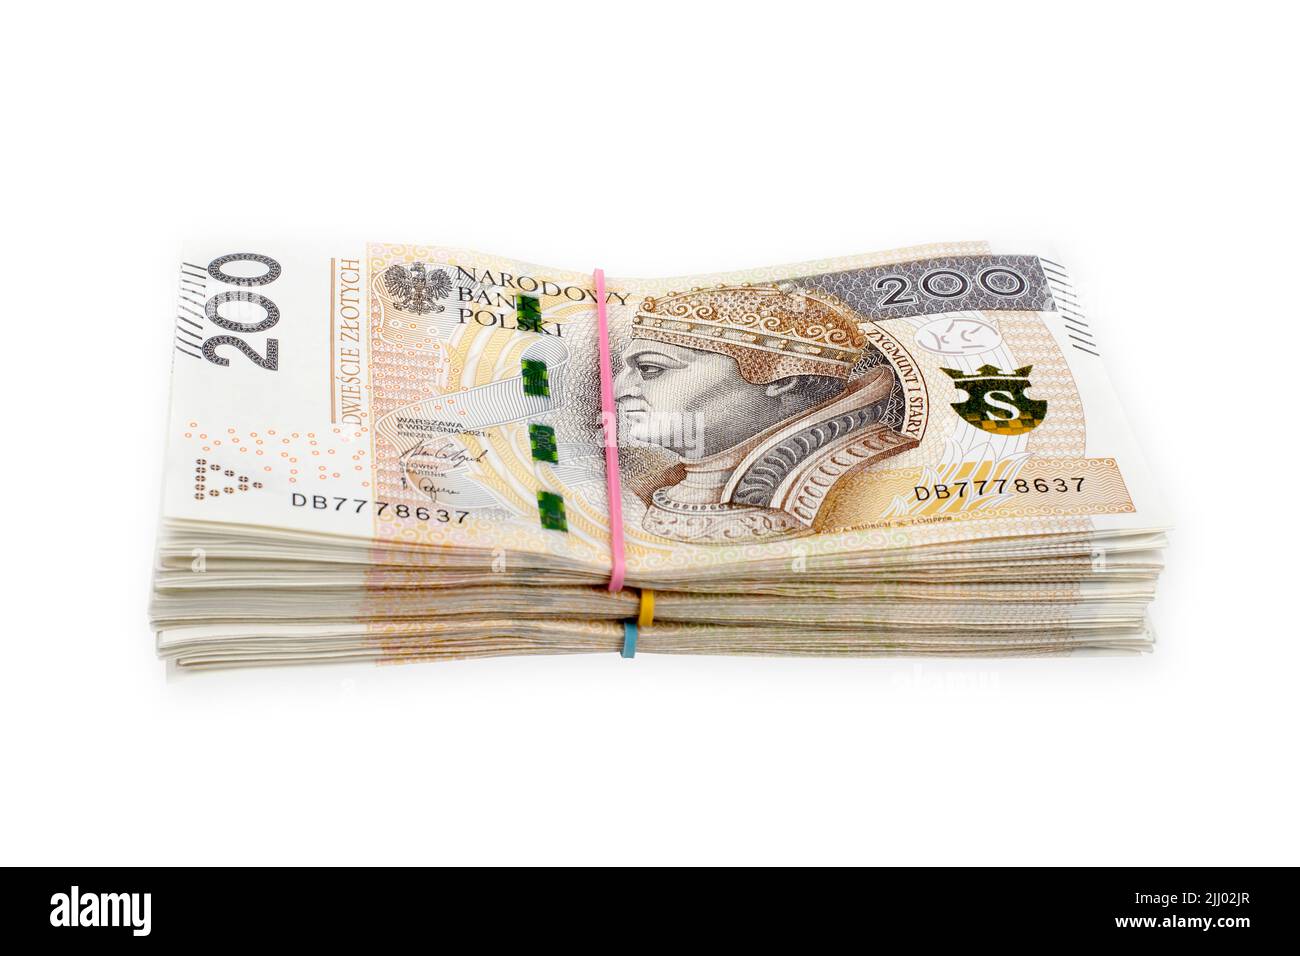 Bundles of polish 200 zloty banknotes. Isolated on white. Clipping path included. Stock Photo